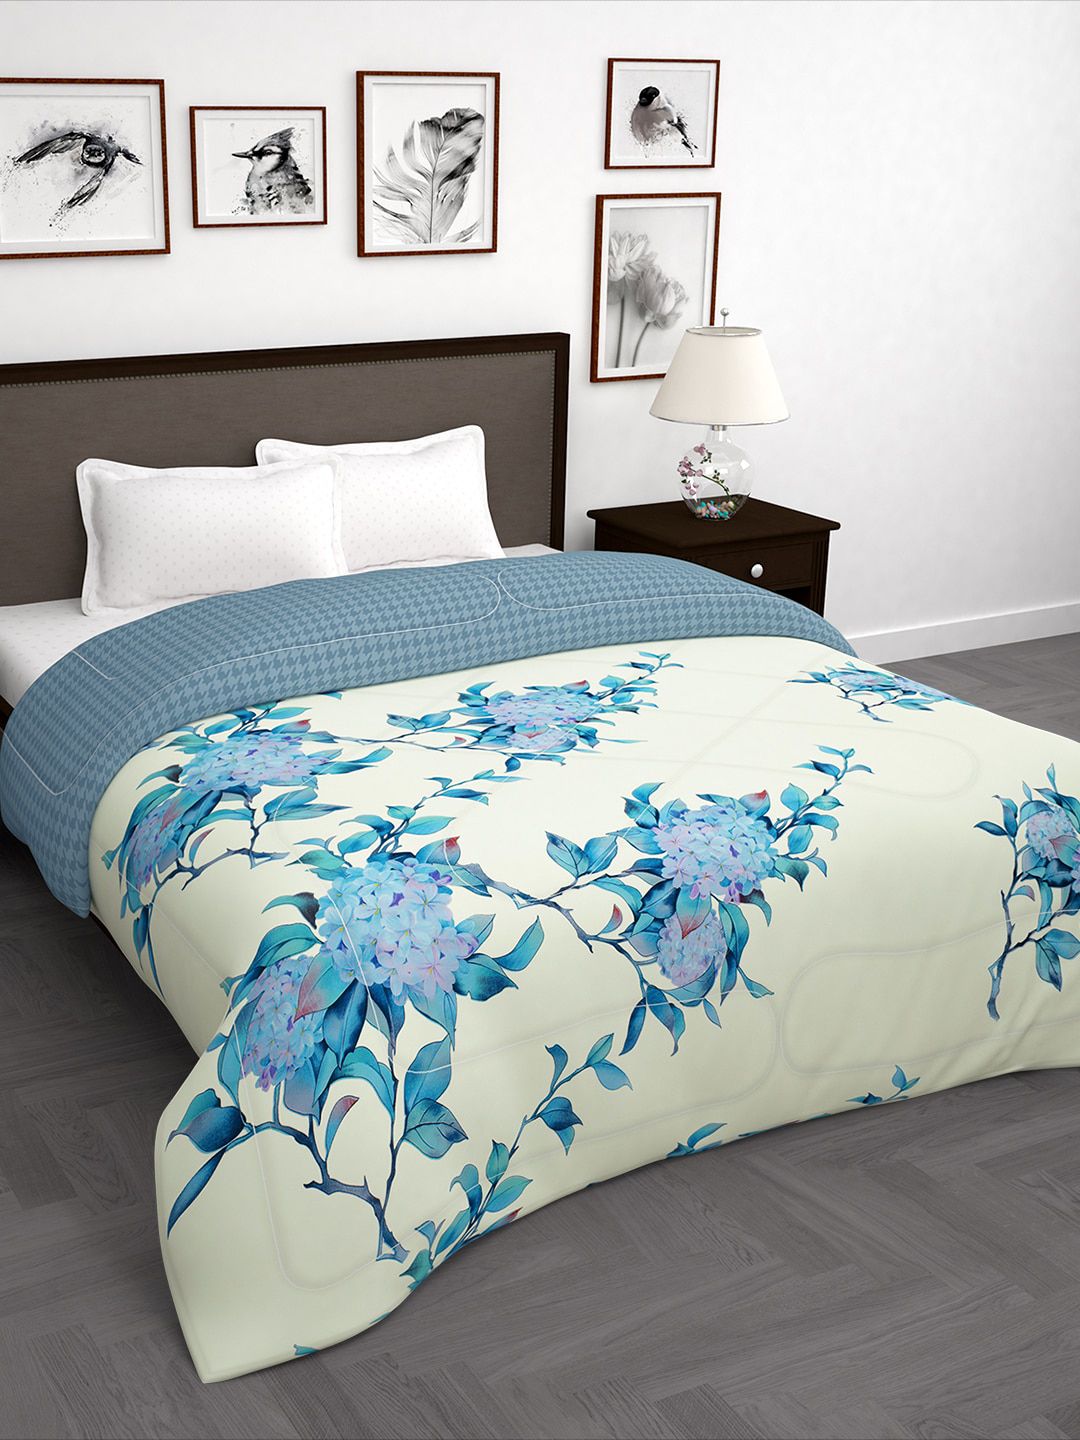 Story@home Cream-Coloured & Blue Floral AC Room Double Bed Comforter Price in India